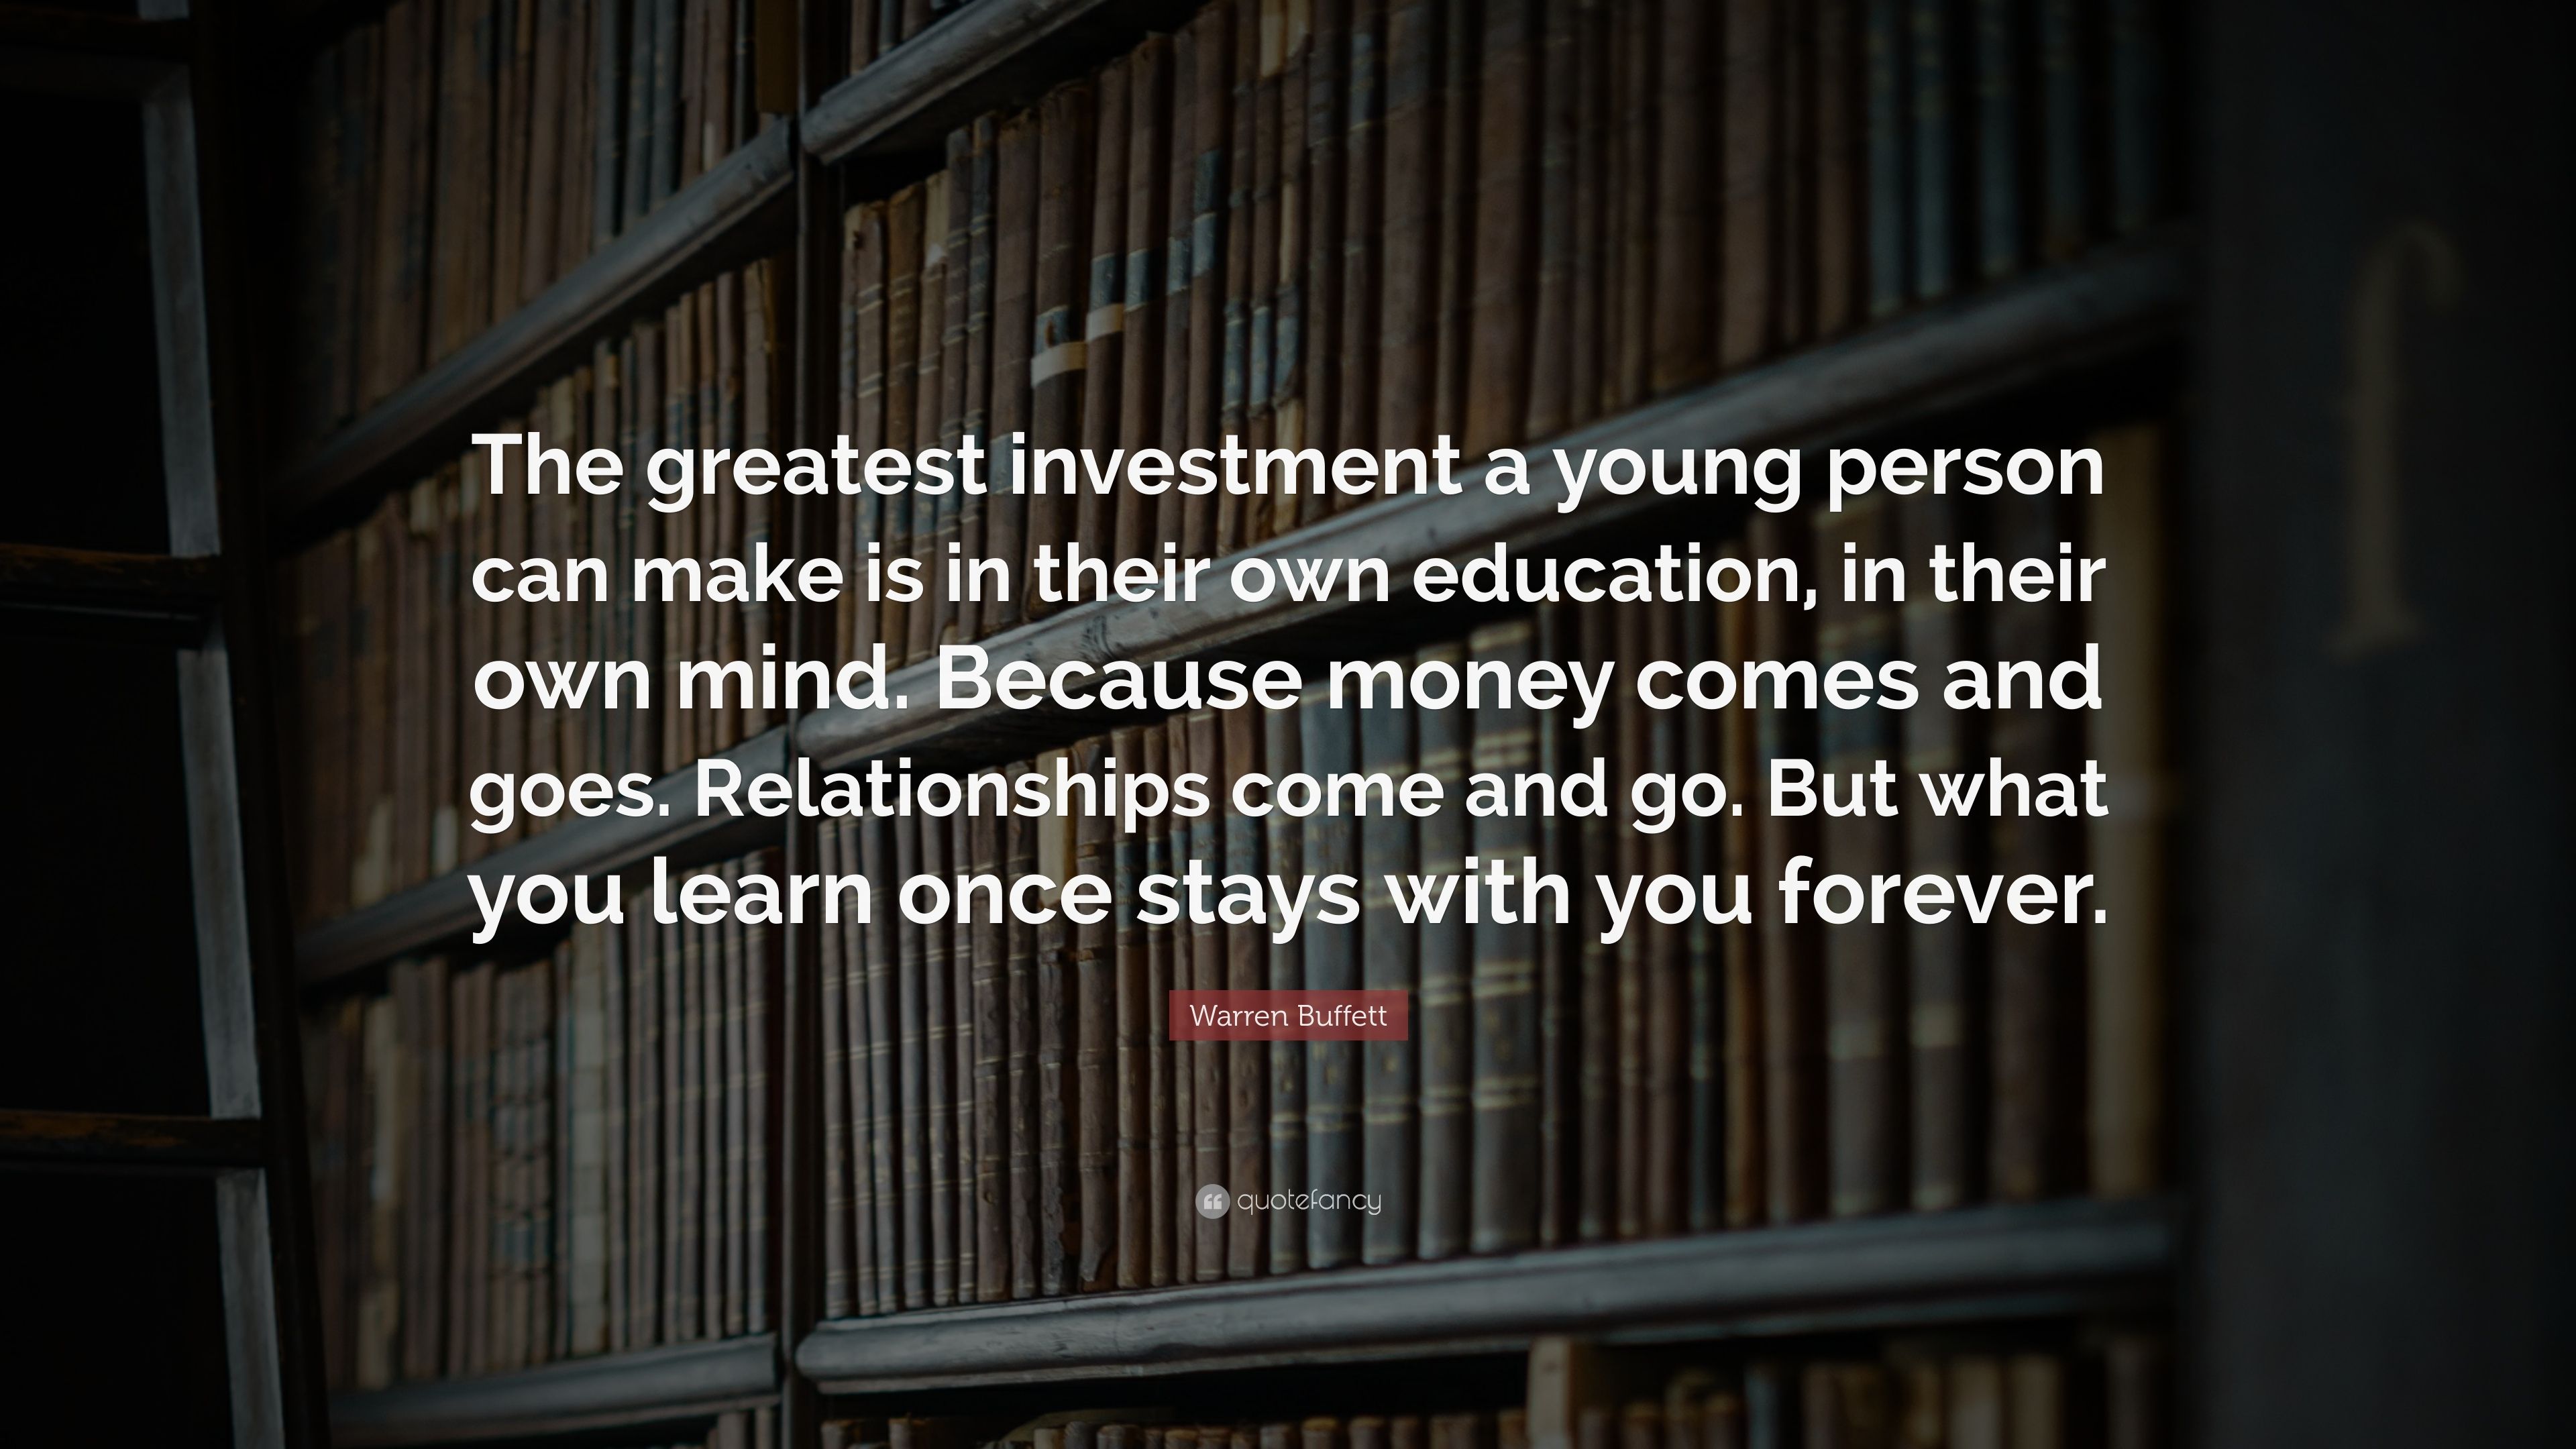 Warren Buffett Quote: “The greatest investment a young person can